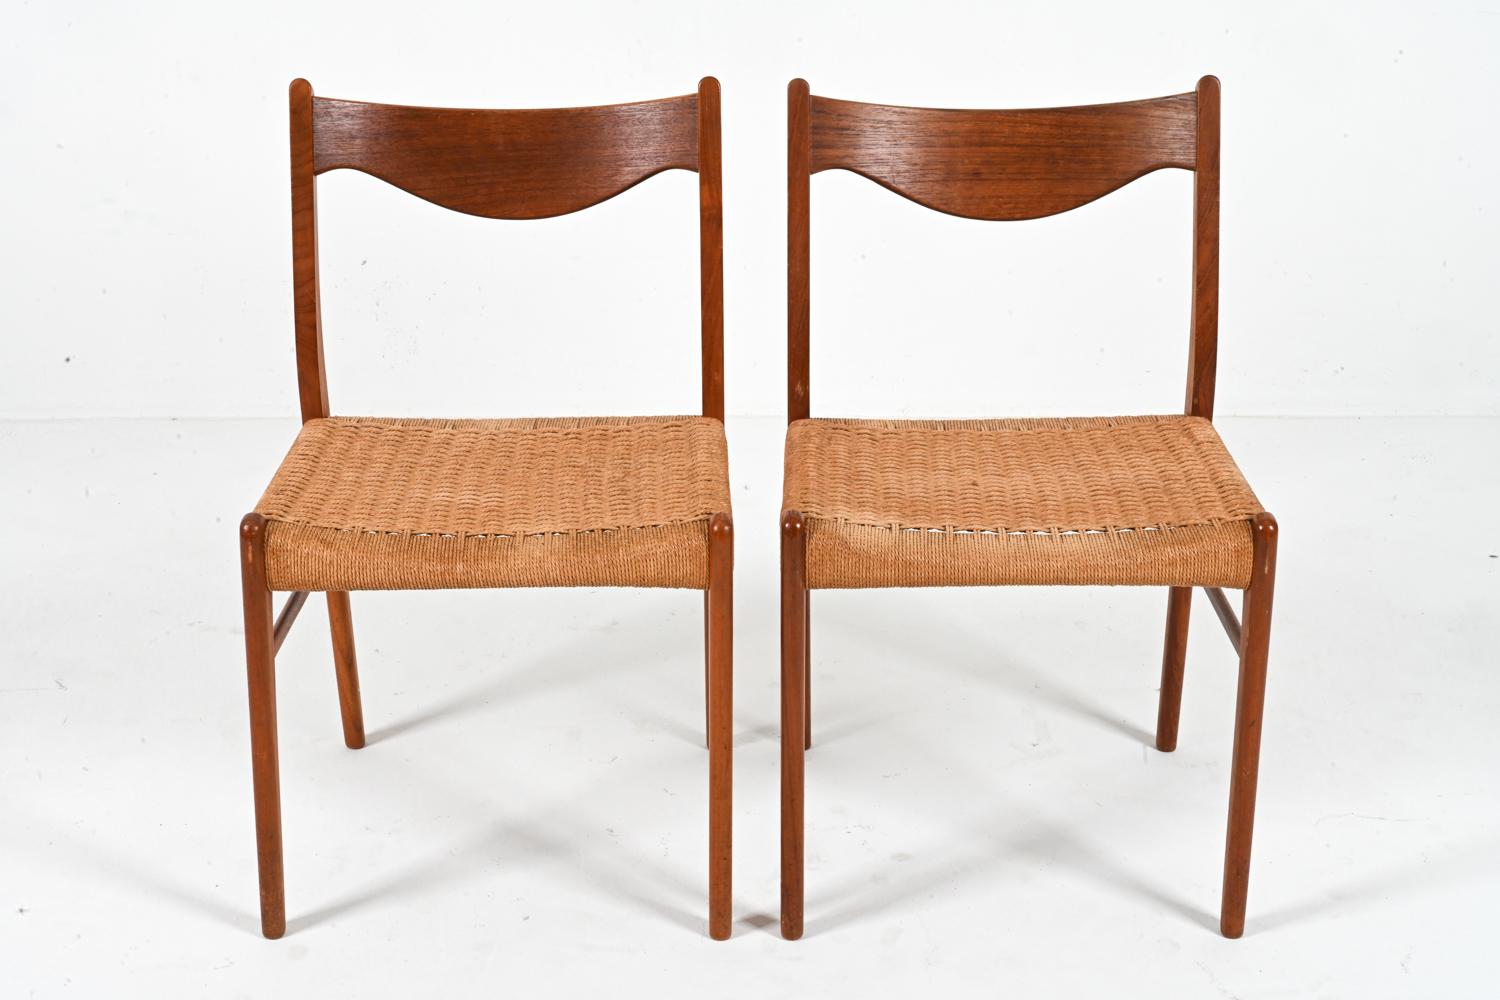 20th Century '6' Teak & Papercord Dining Chairs by Arne Wahl Iversen for Glyngøre Stolefabrik For Sale